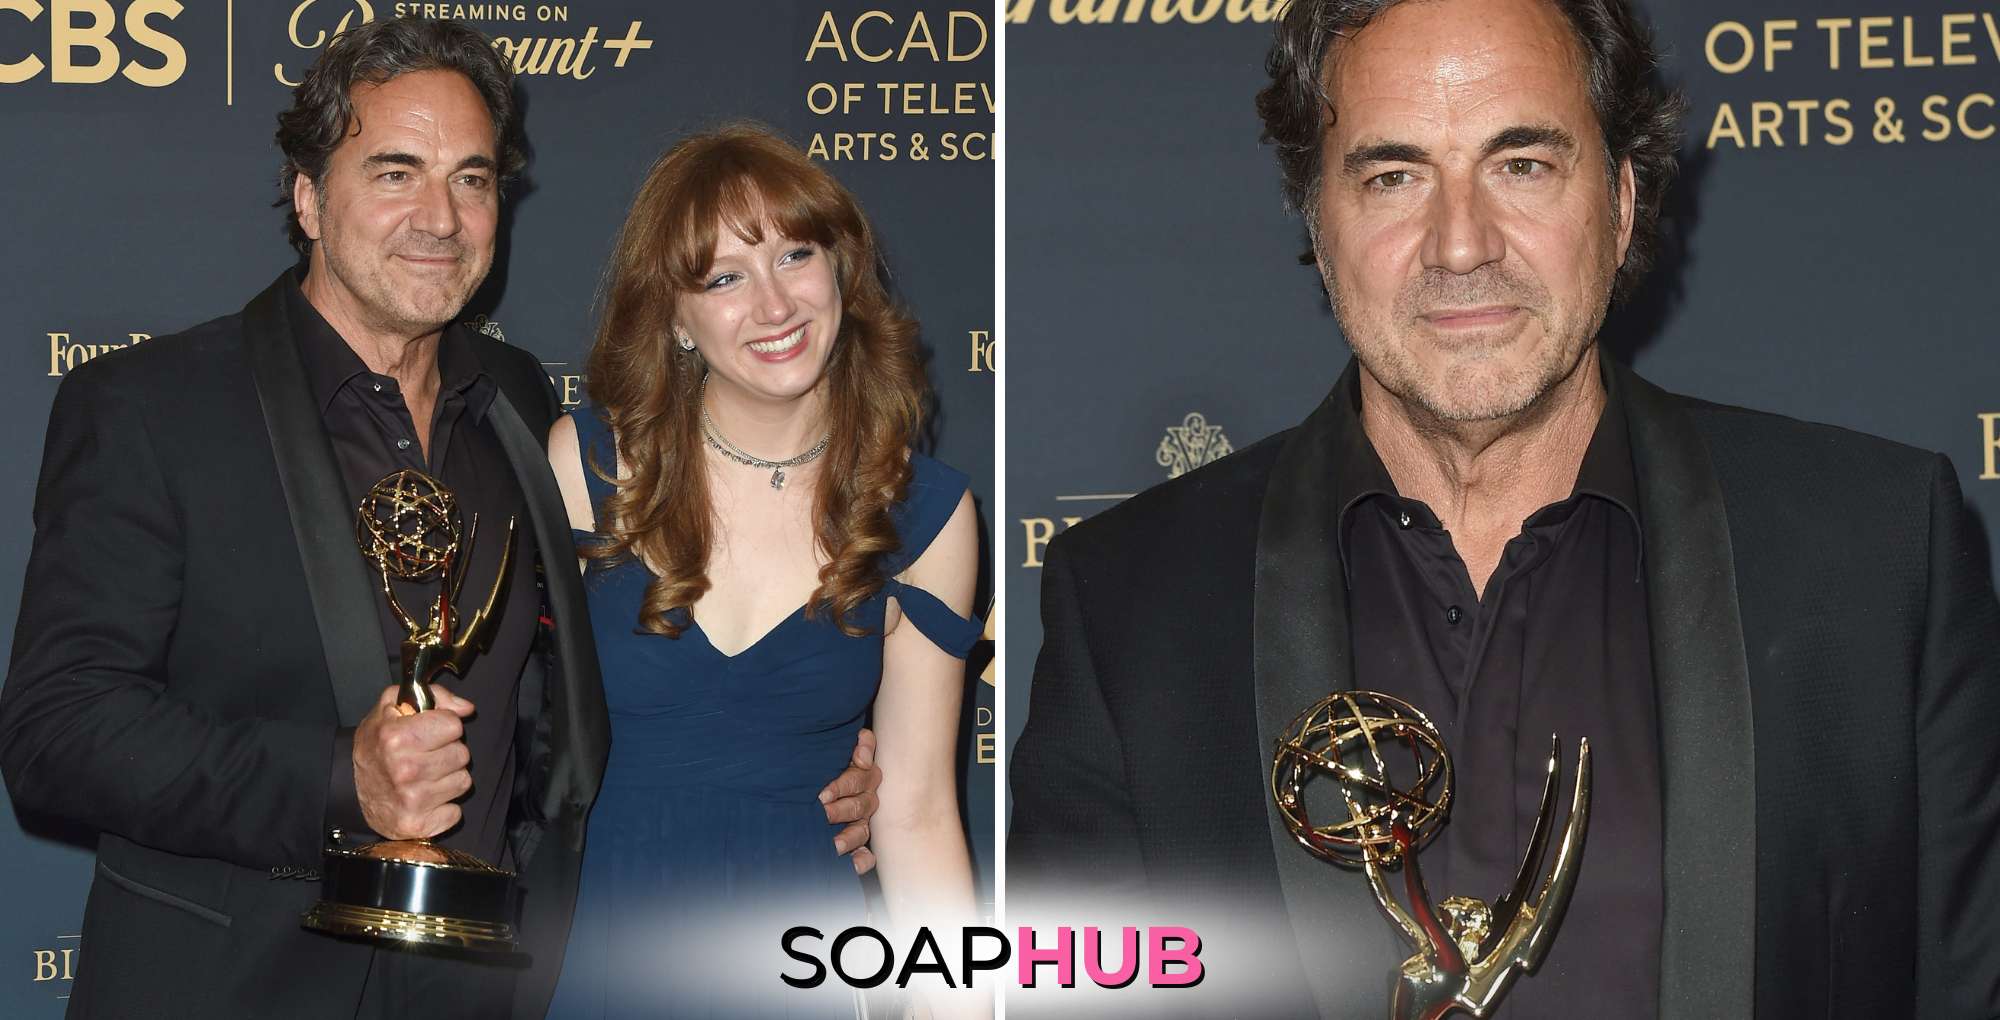 Bold and the Beautiful star Thorsten Kaye and his daughter McKenna with the Soap Hub logo.